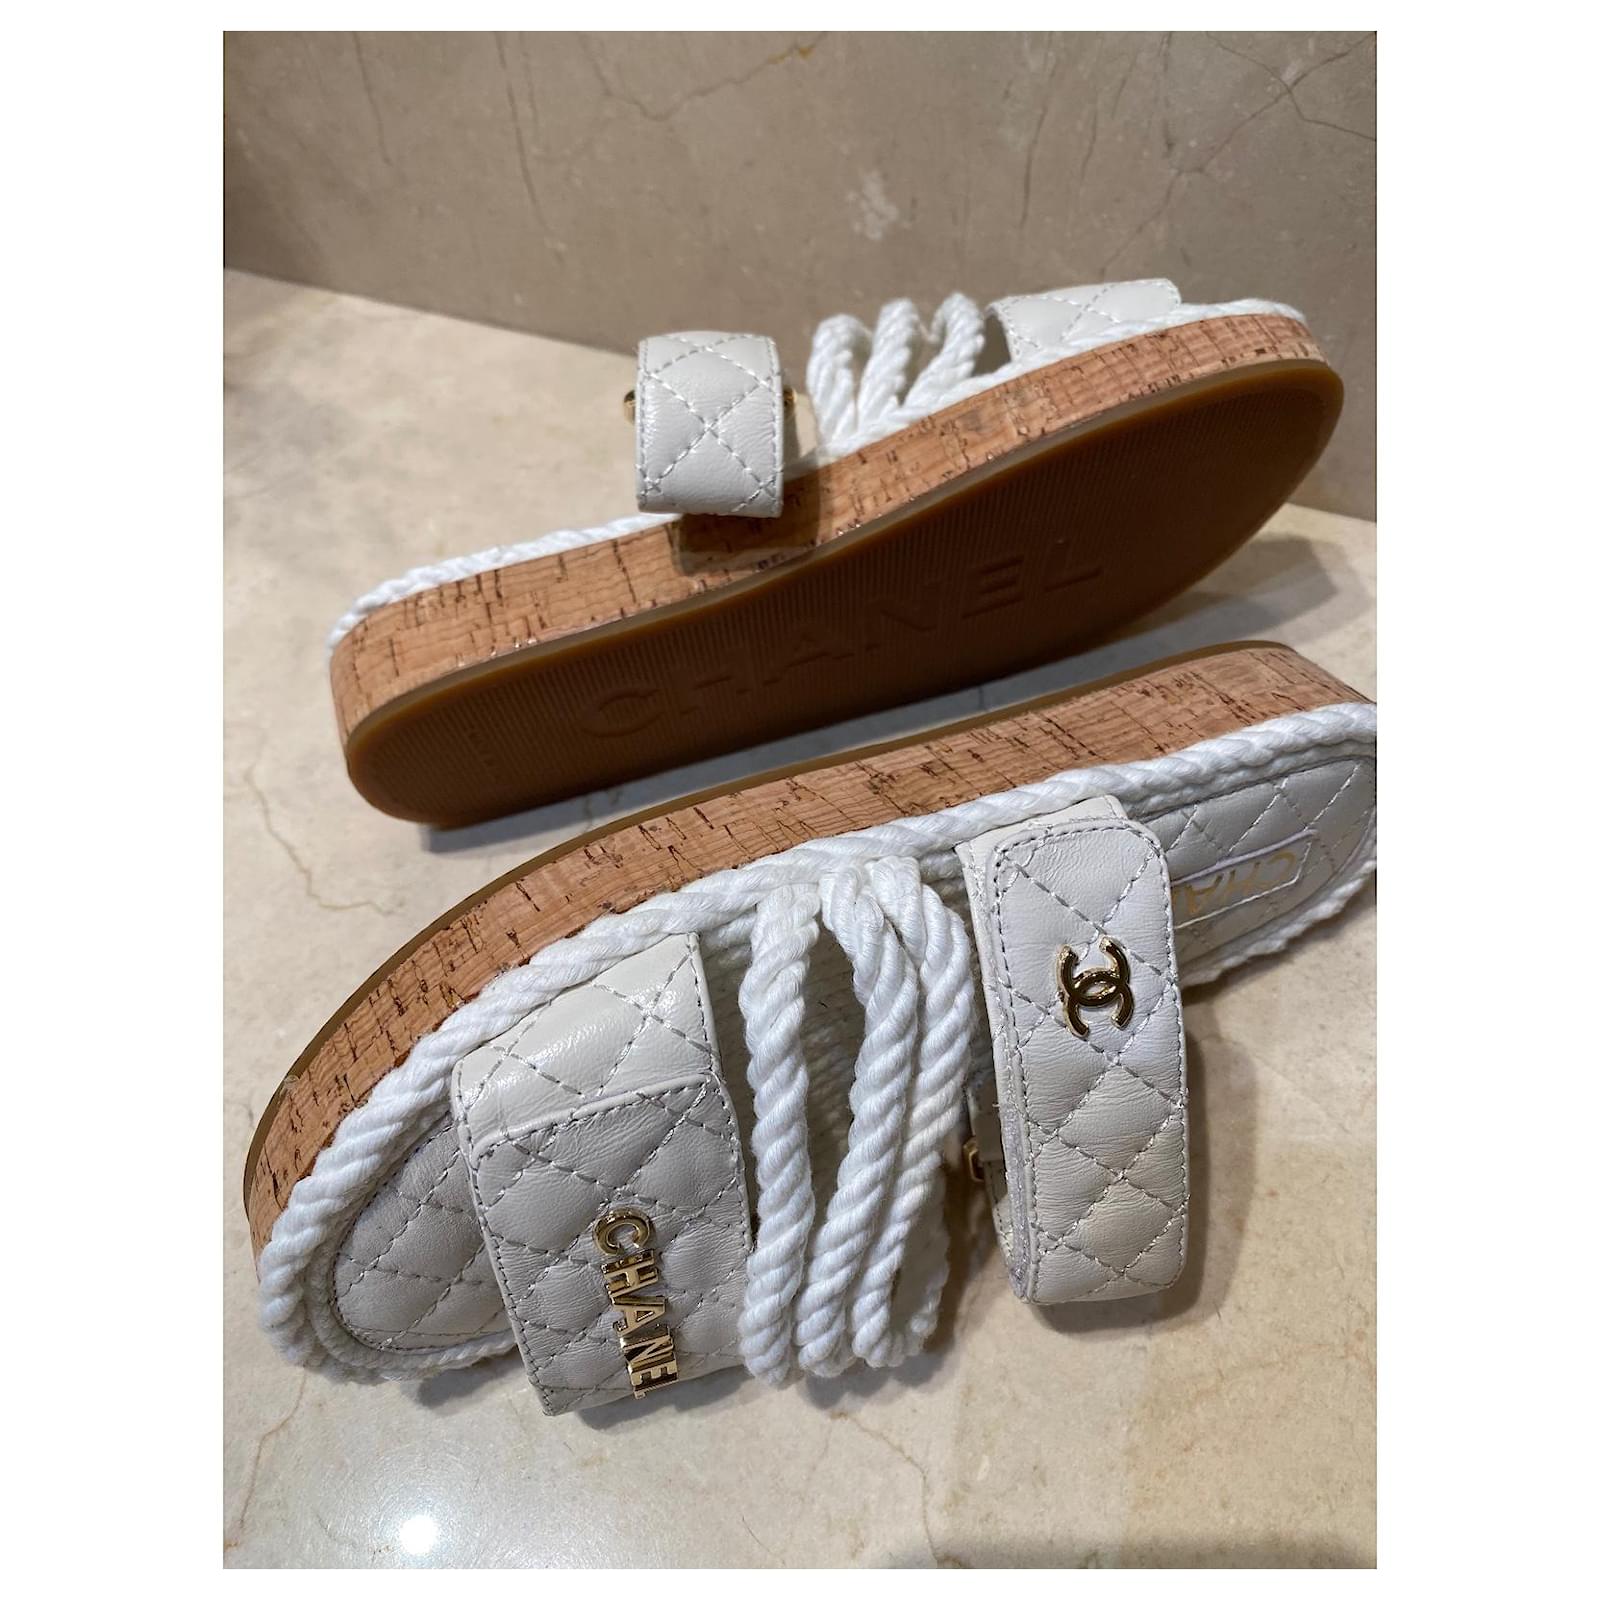 Chanel Dad sandals/mules in white cord